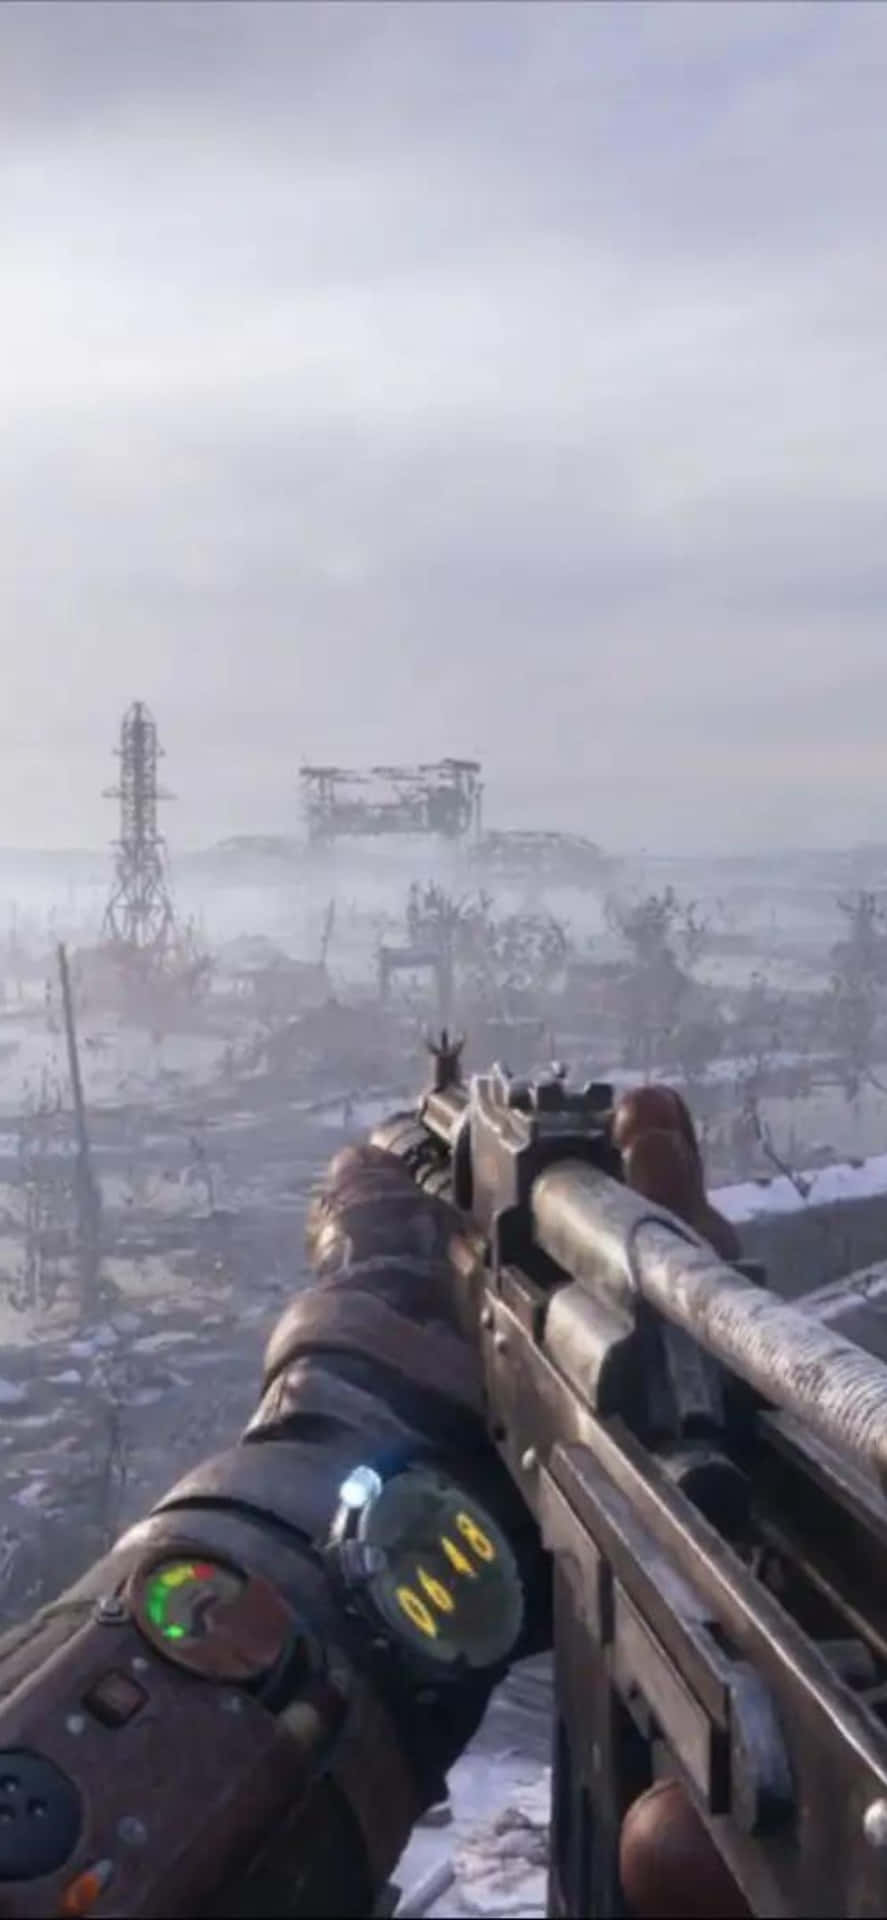 Explore a post-apocalyptic world on your Iphone X with Metro Exodus.